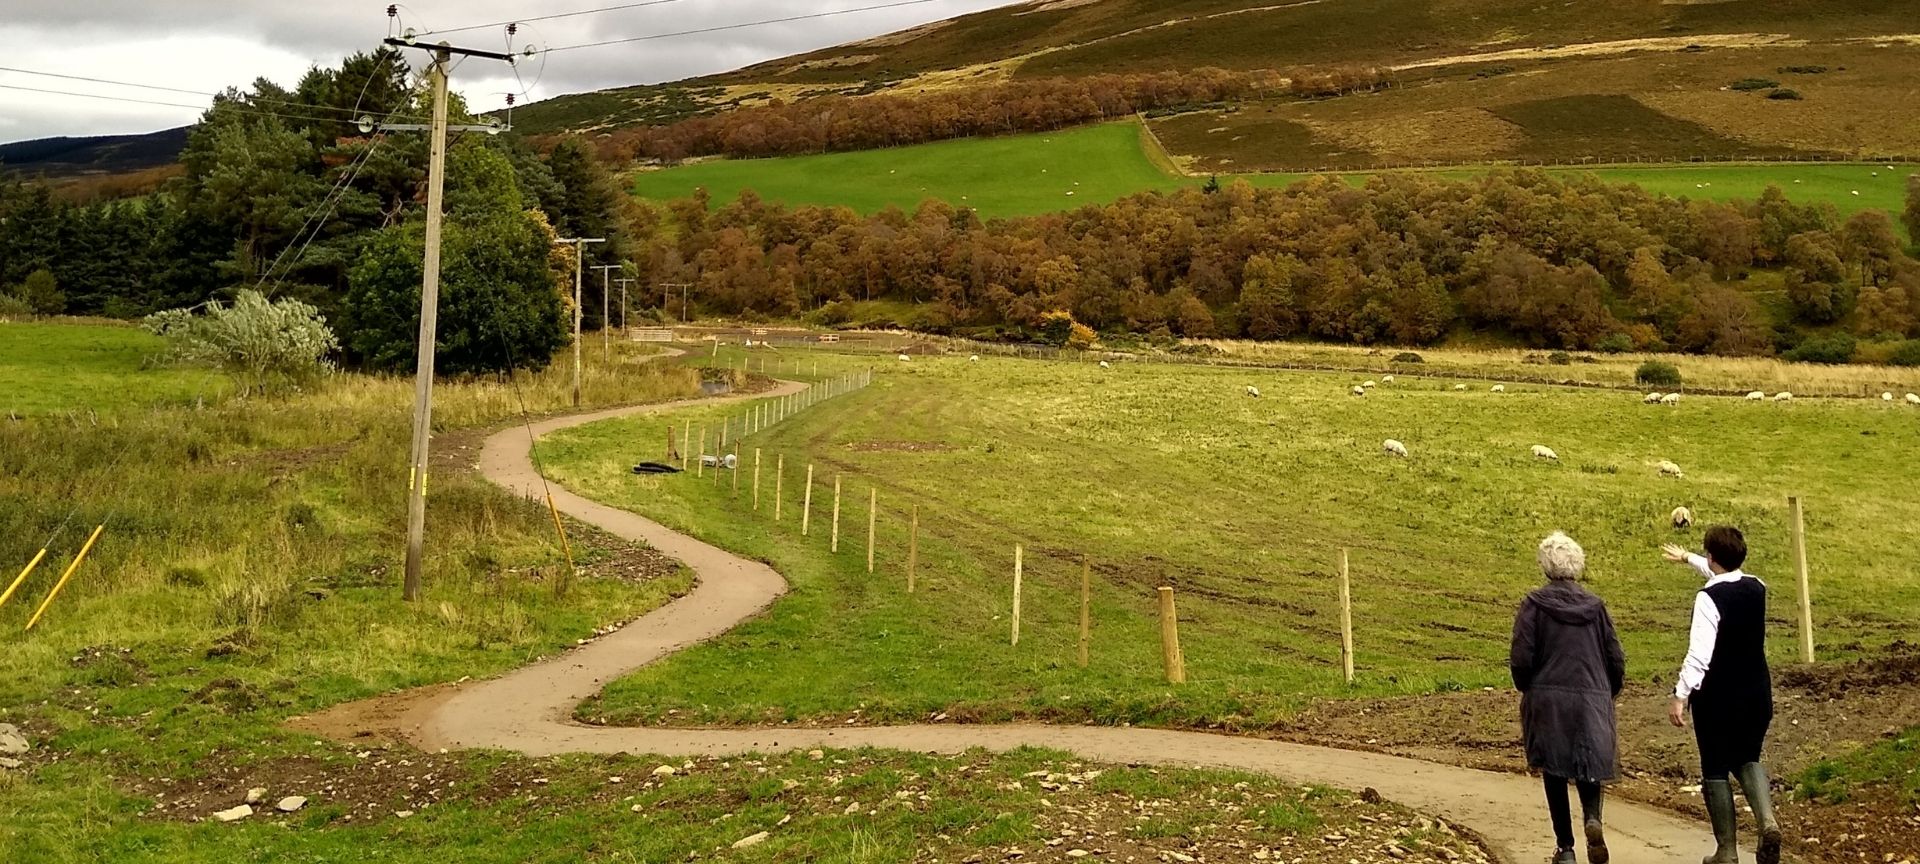 Improving access and the environment in the Cabrach